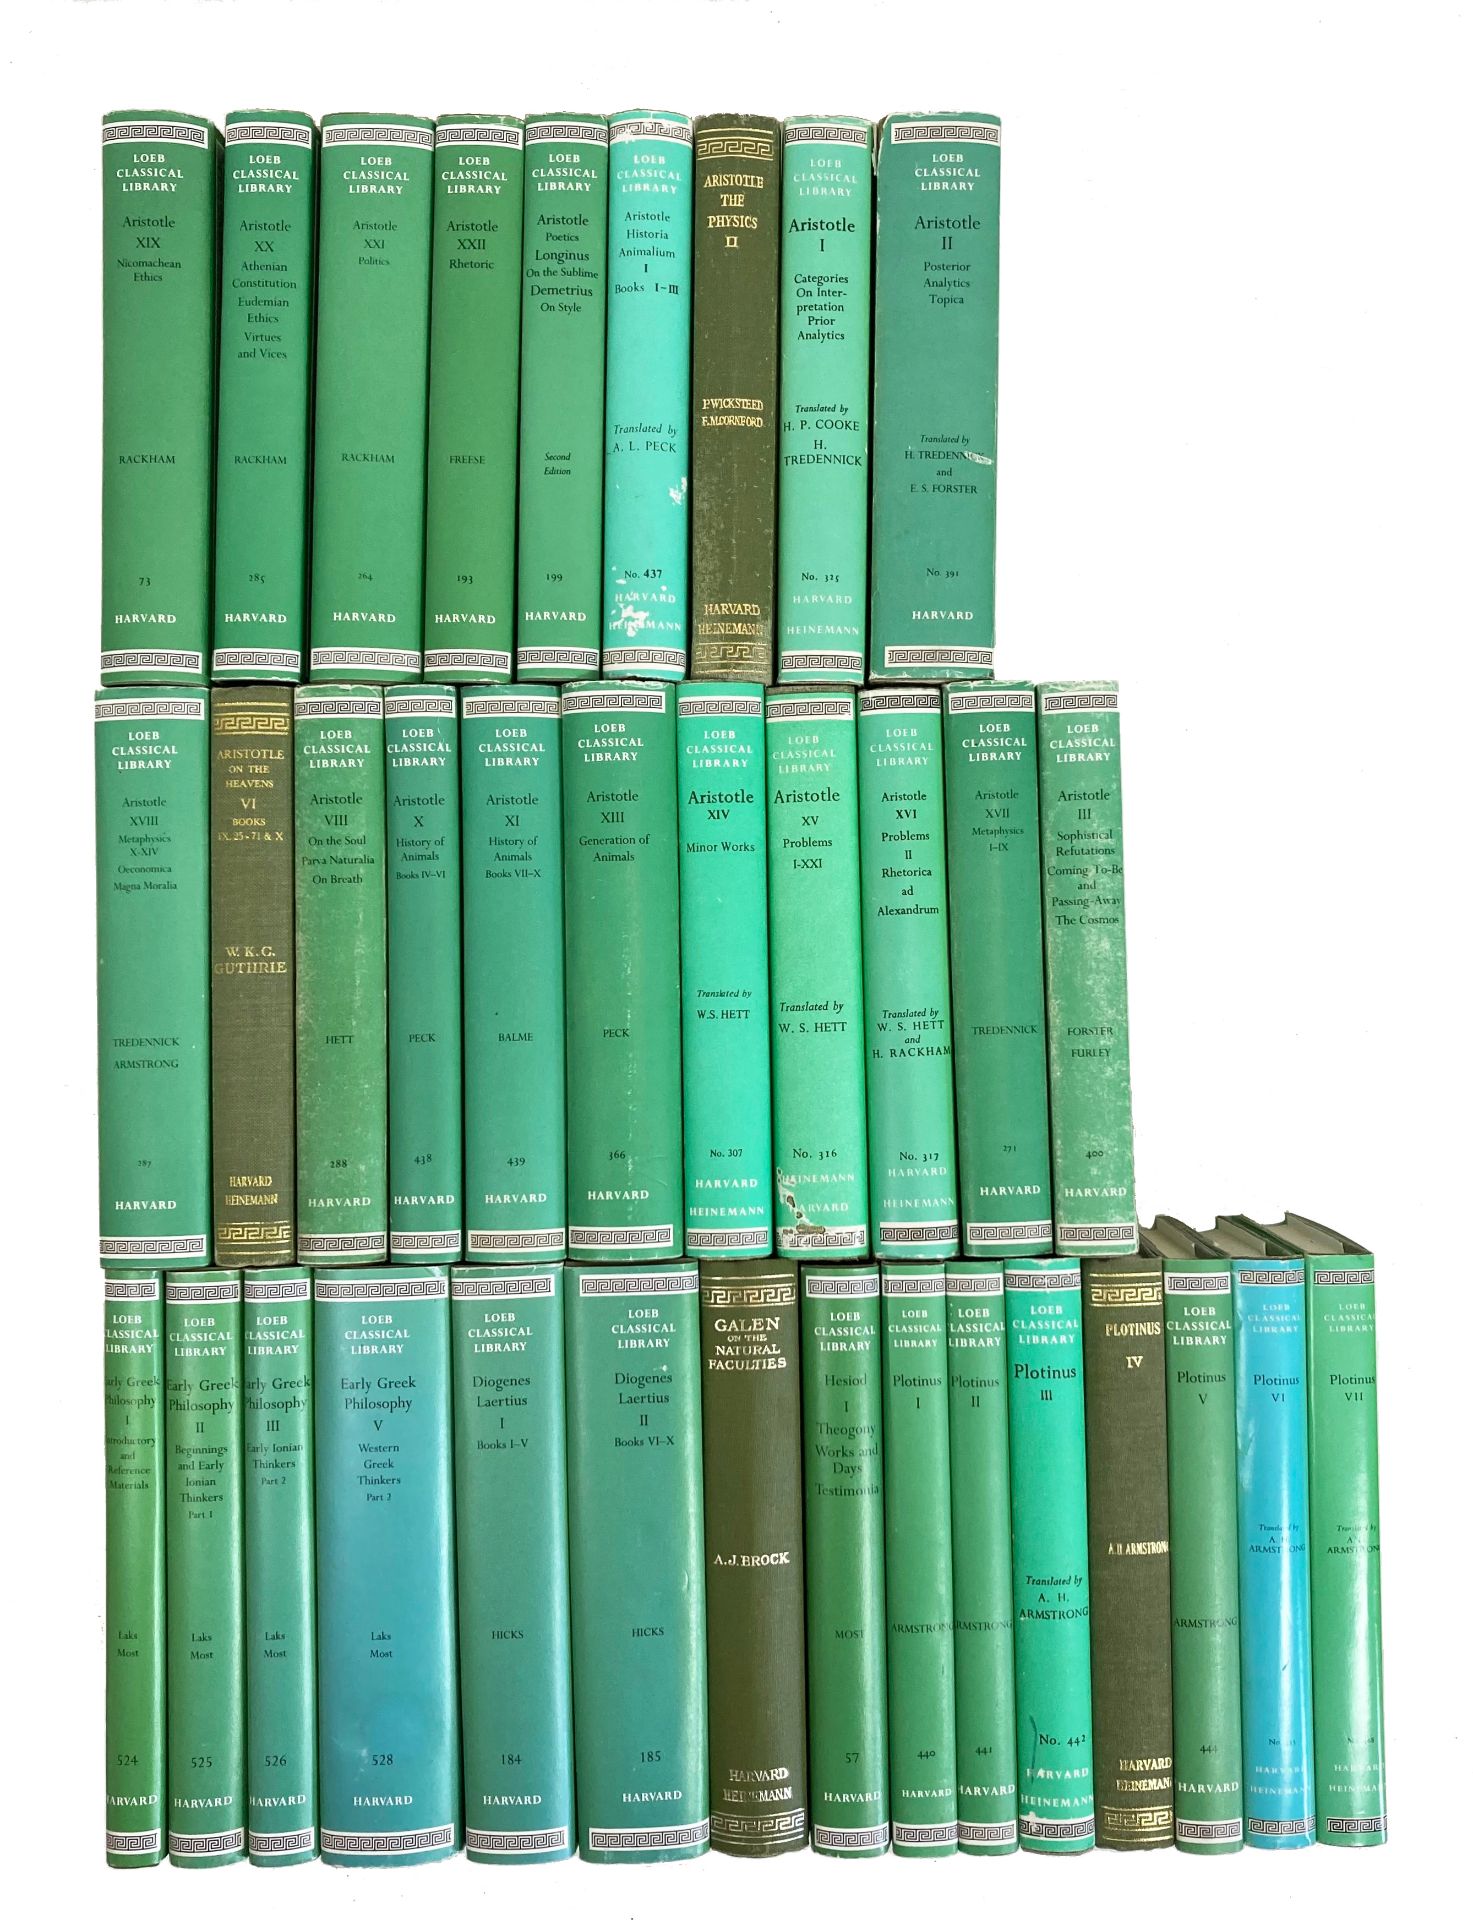 LOEB CLASSICAL LIBRARY. Greek authors. 35 vols of the series. Ocl. (31